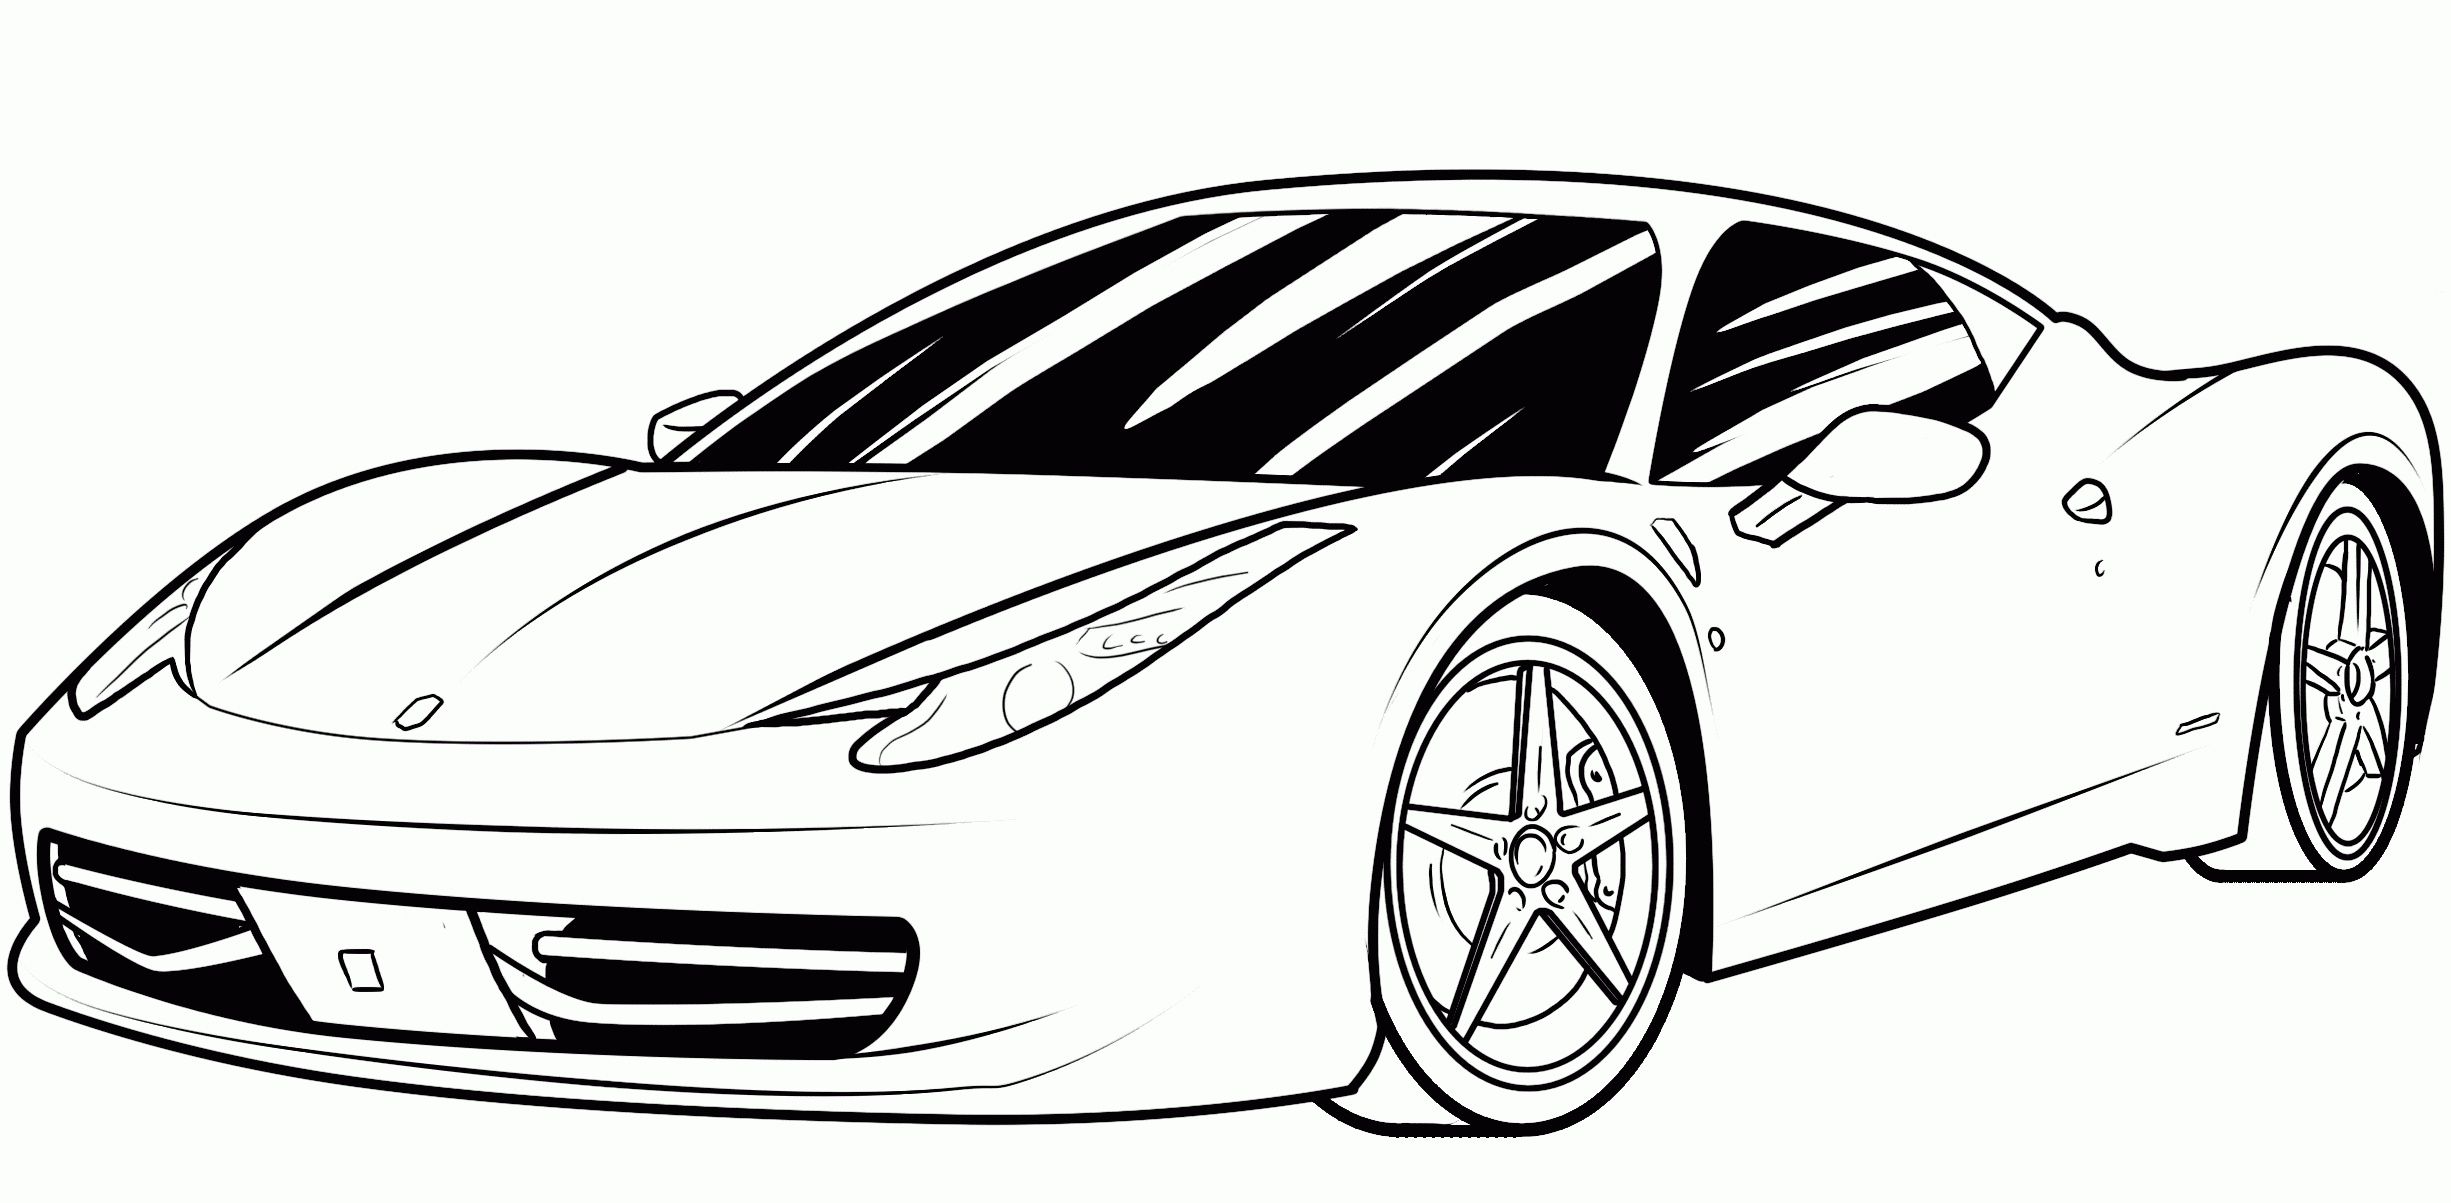 857 Cartoon Auto Coloring Pages for Kids